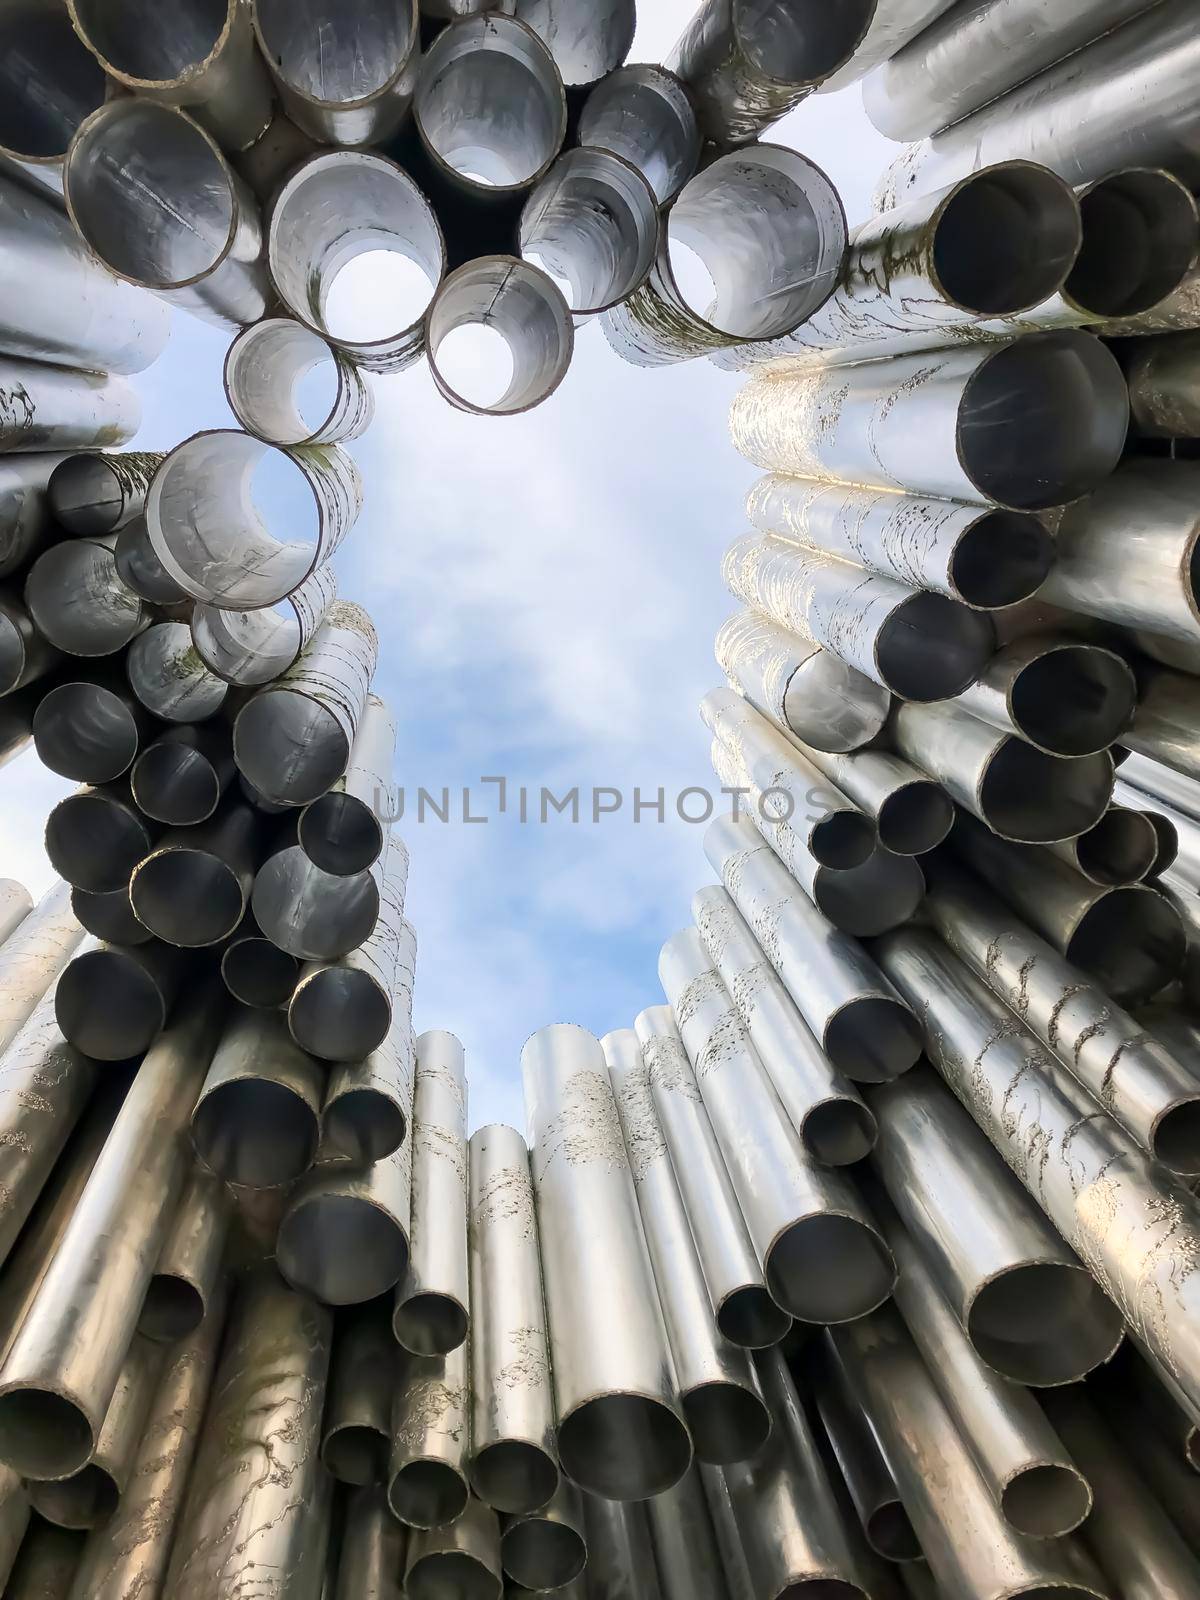 Sibelius monument seen from underneath  by kaliaevaen